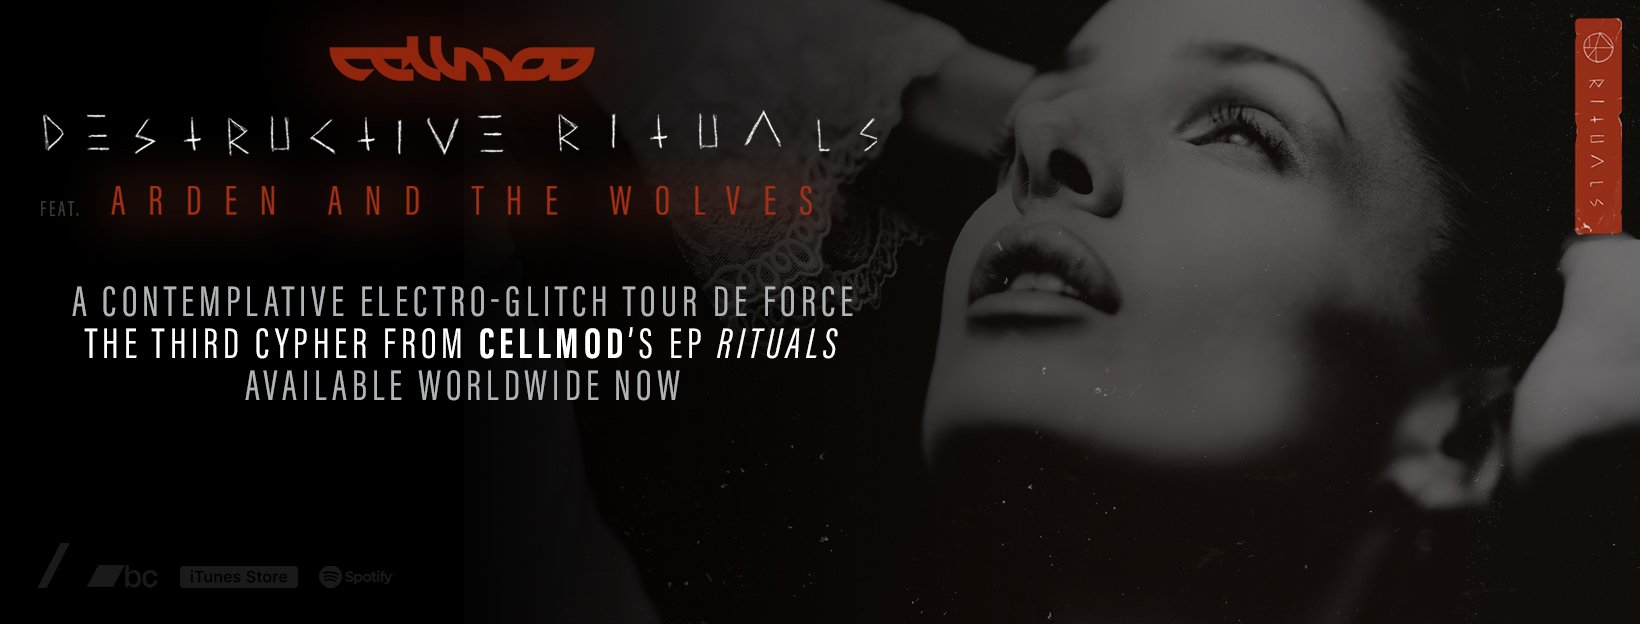 Cellmod - Destructive Rituals feat. Arden and the Wolves